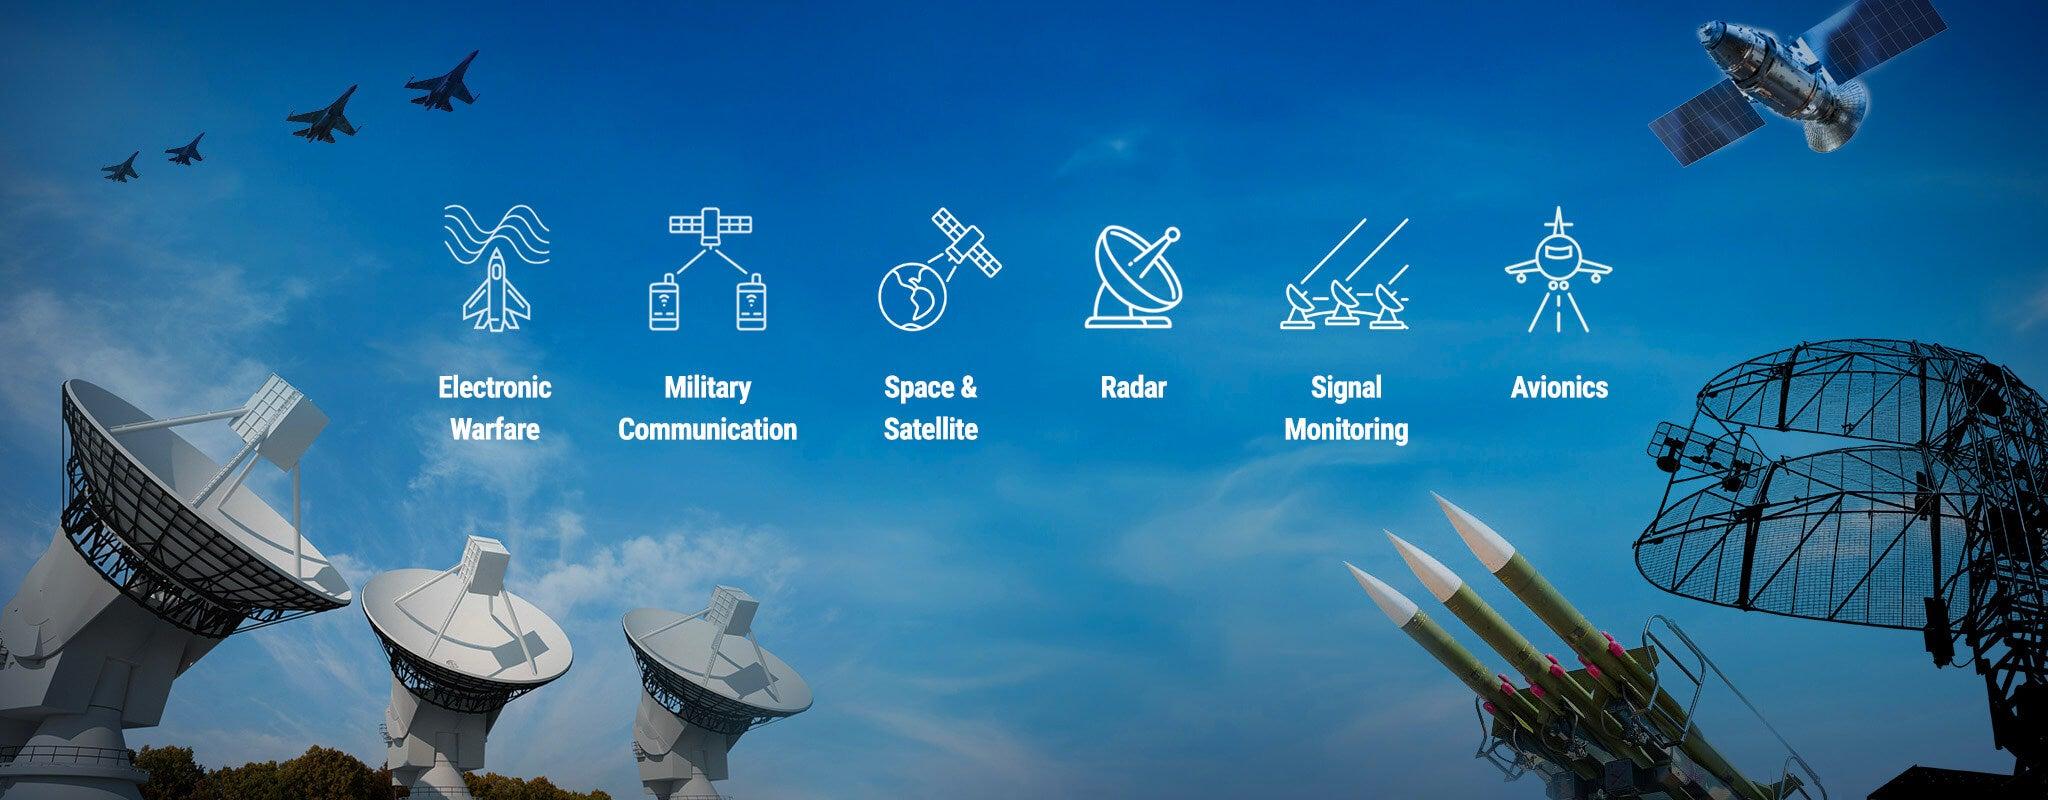 Smart Solutions for Aerospace & Defence Applications